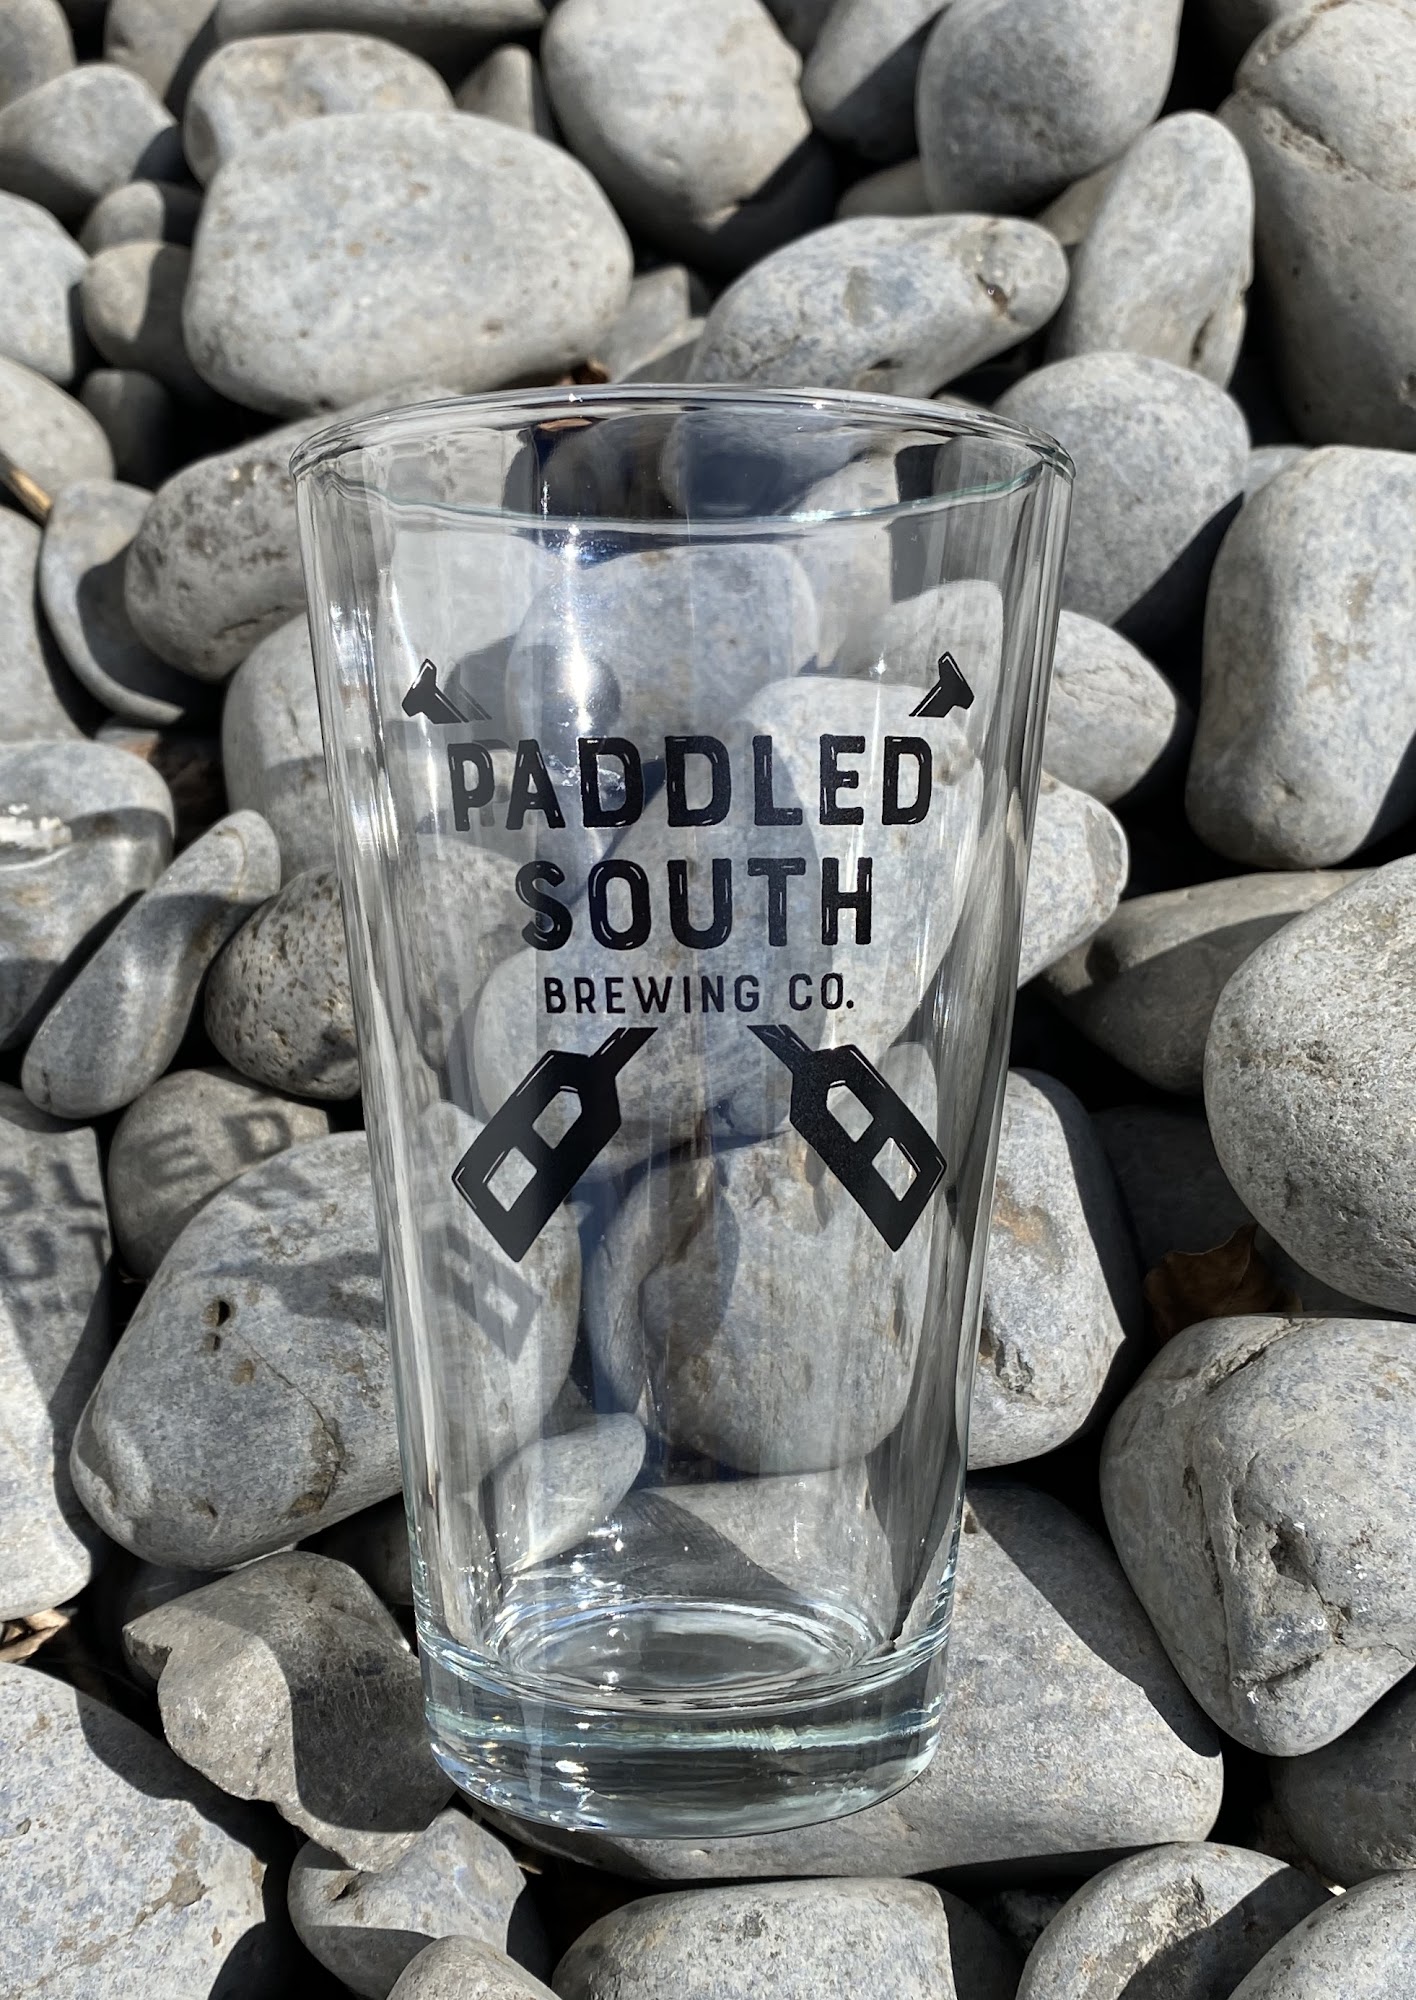 Paddled South Brewing Company